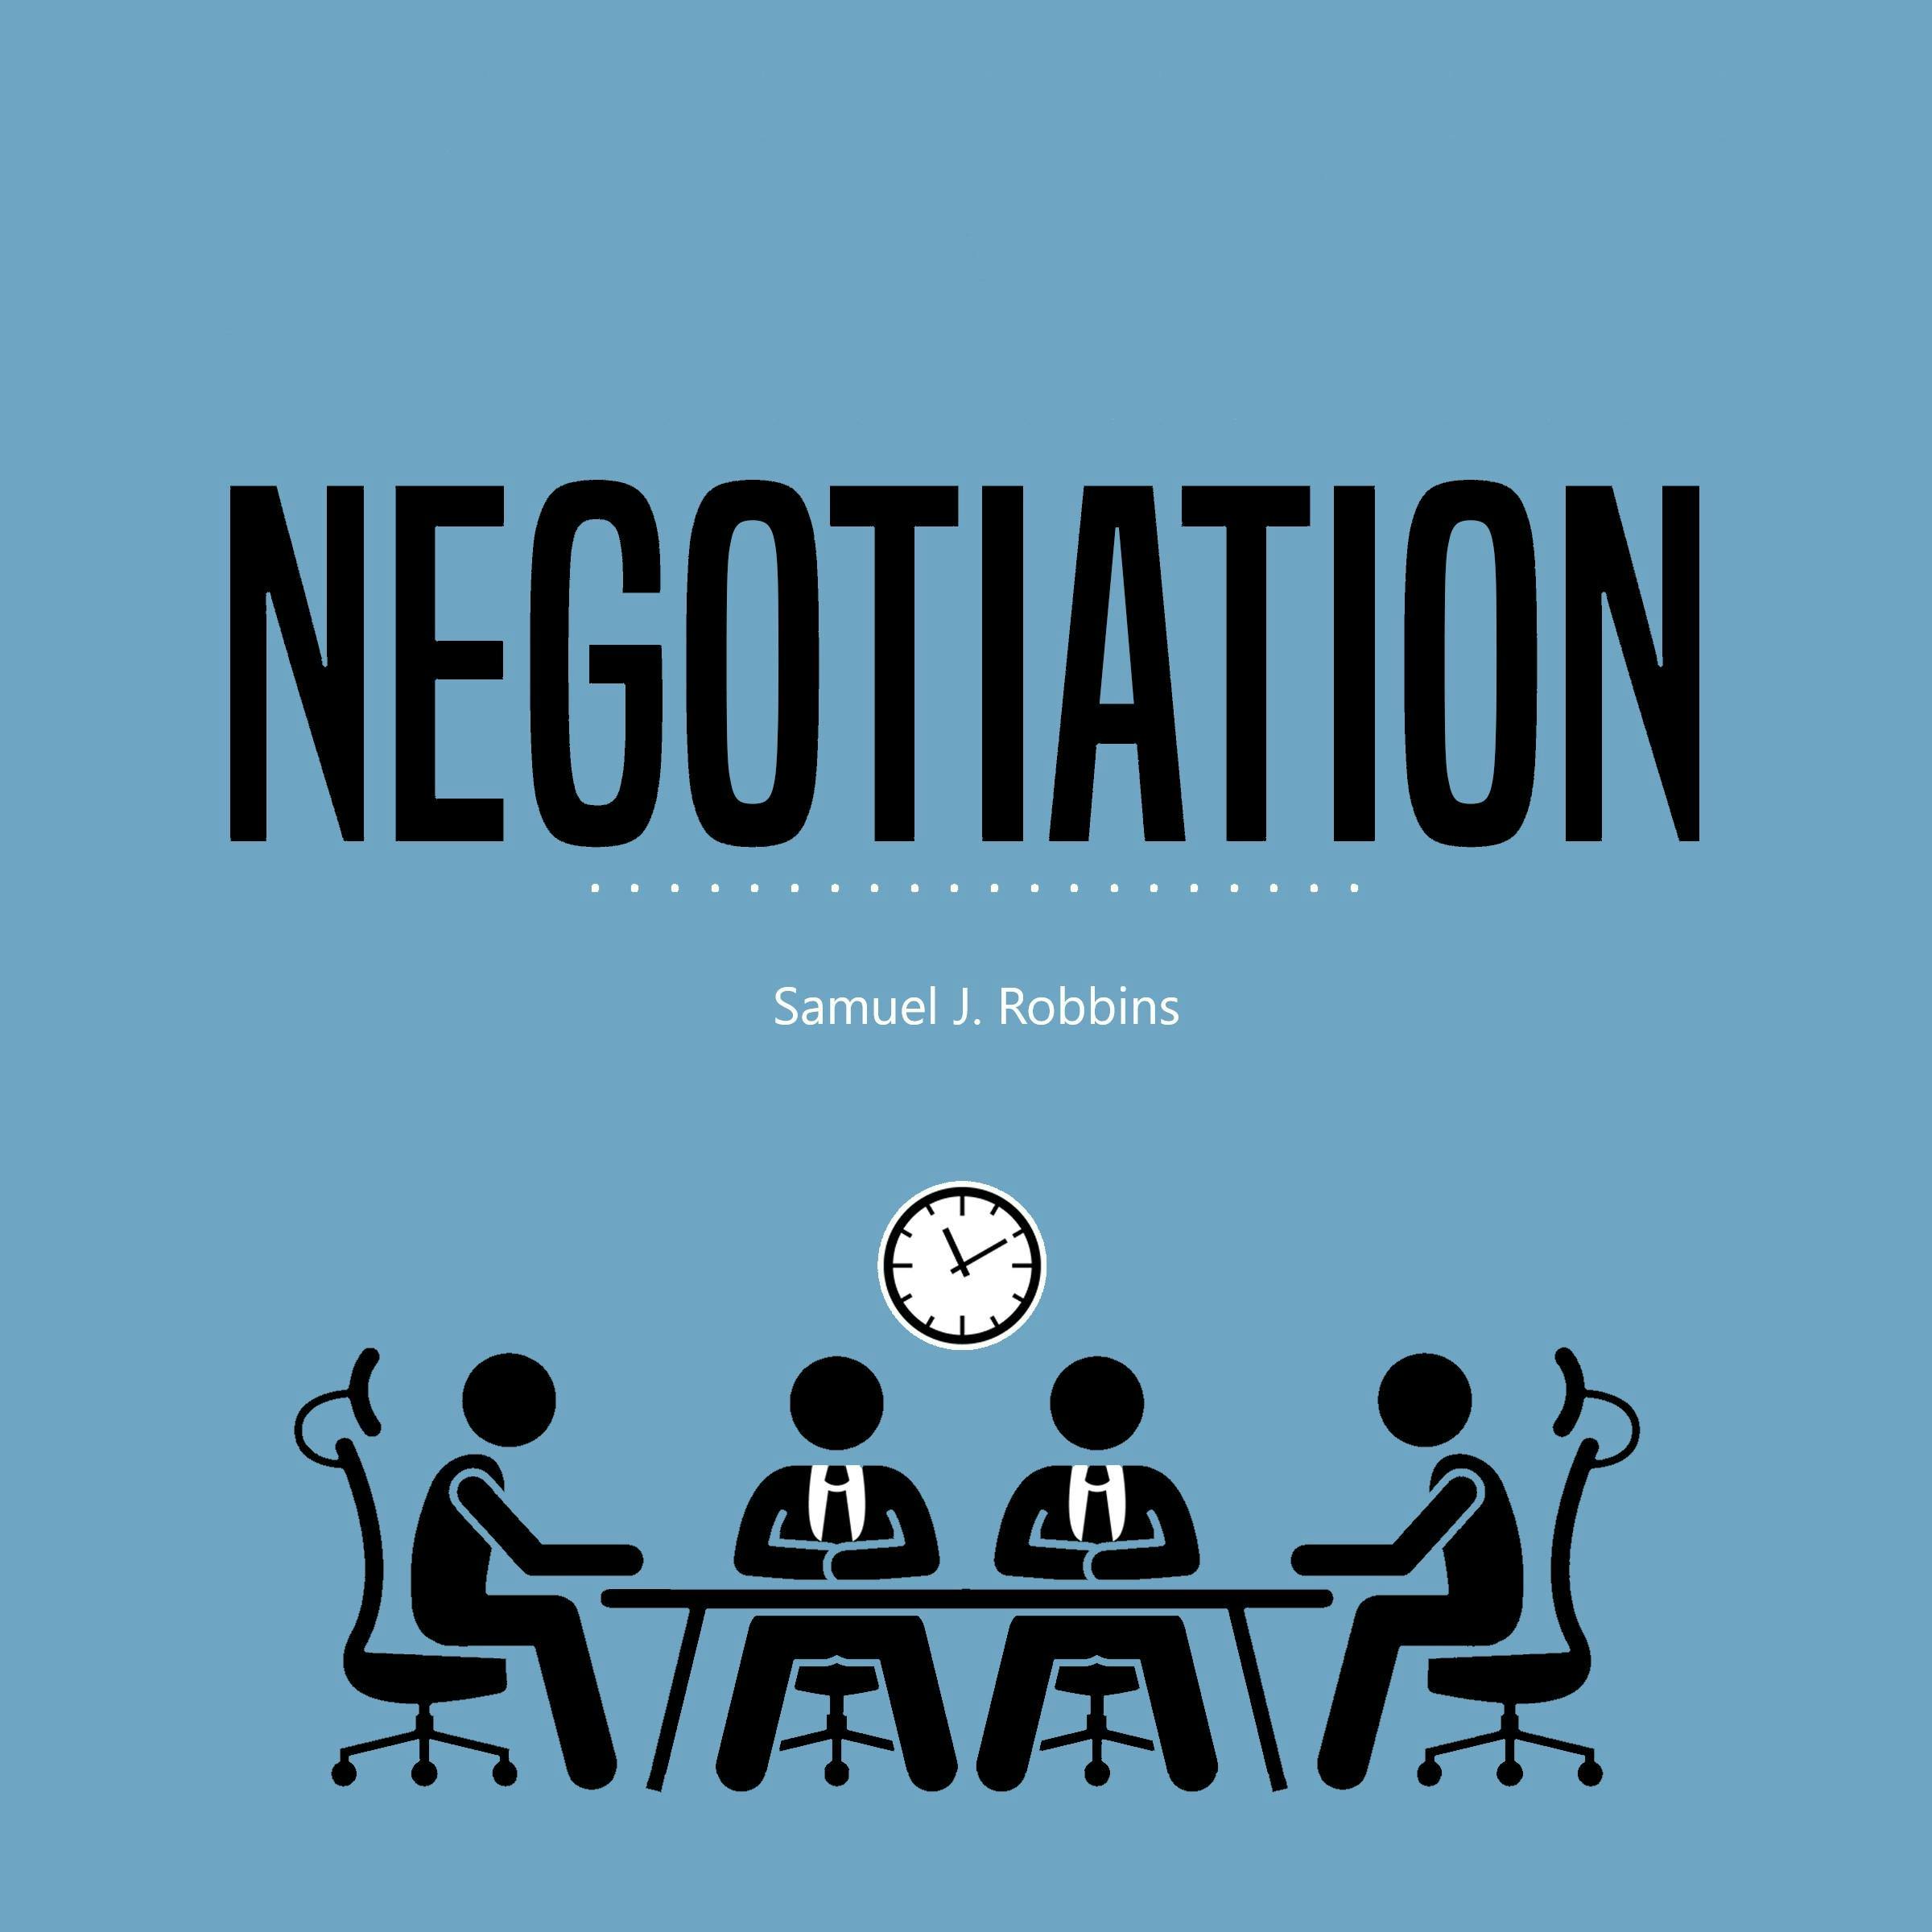 Negotiation: A Beginner's Guide to Influence, Analyze People Using Persuasion and Powerful Communication Skills - Samuel J. Robbins